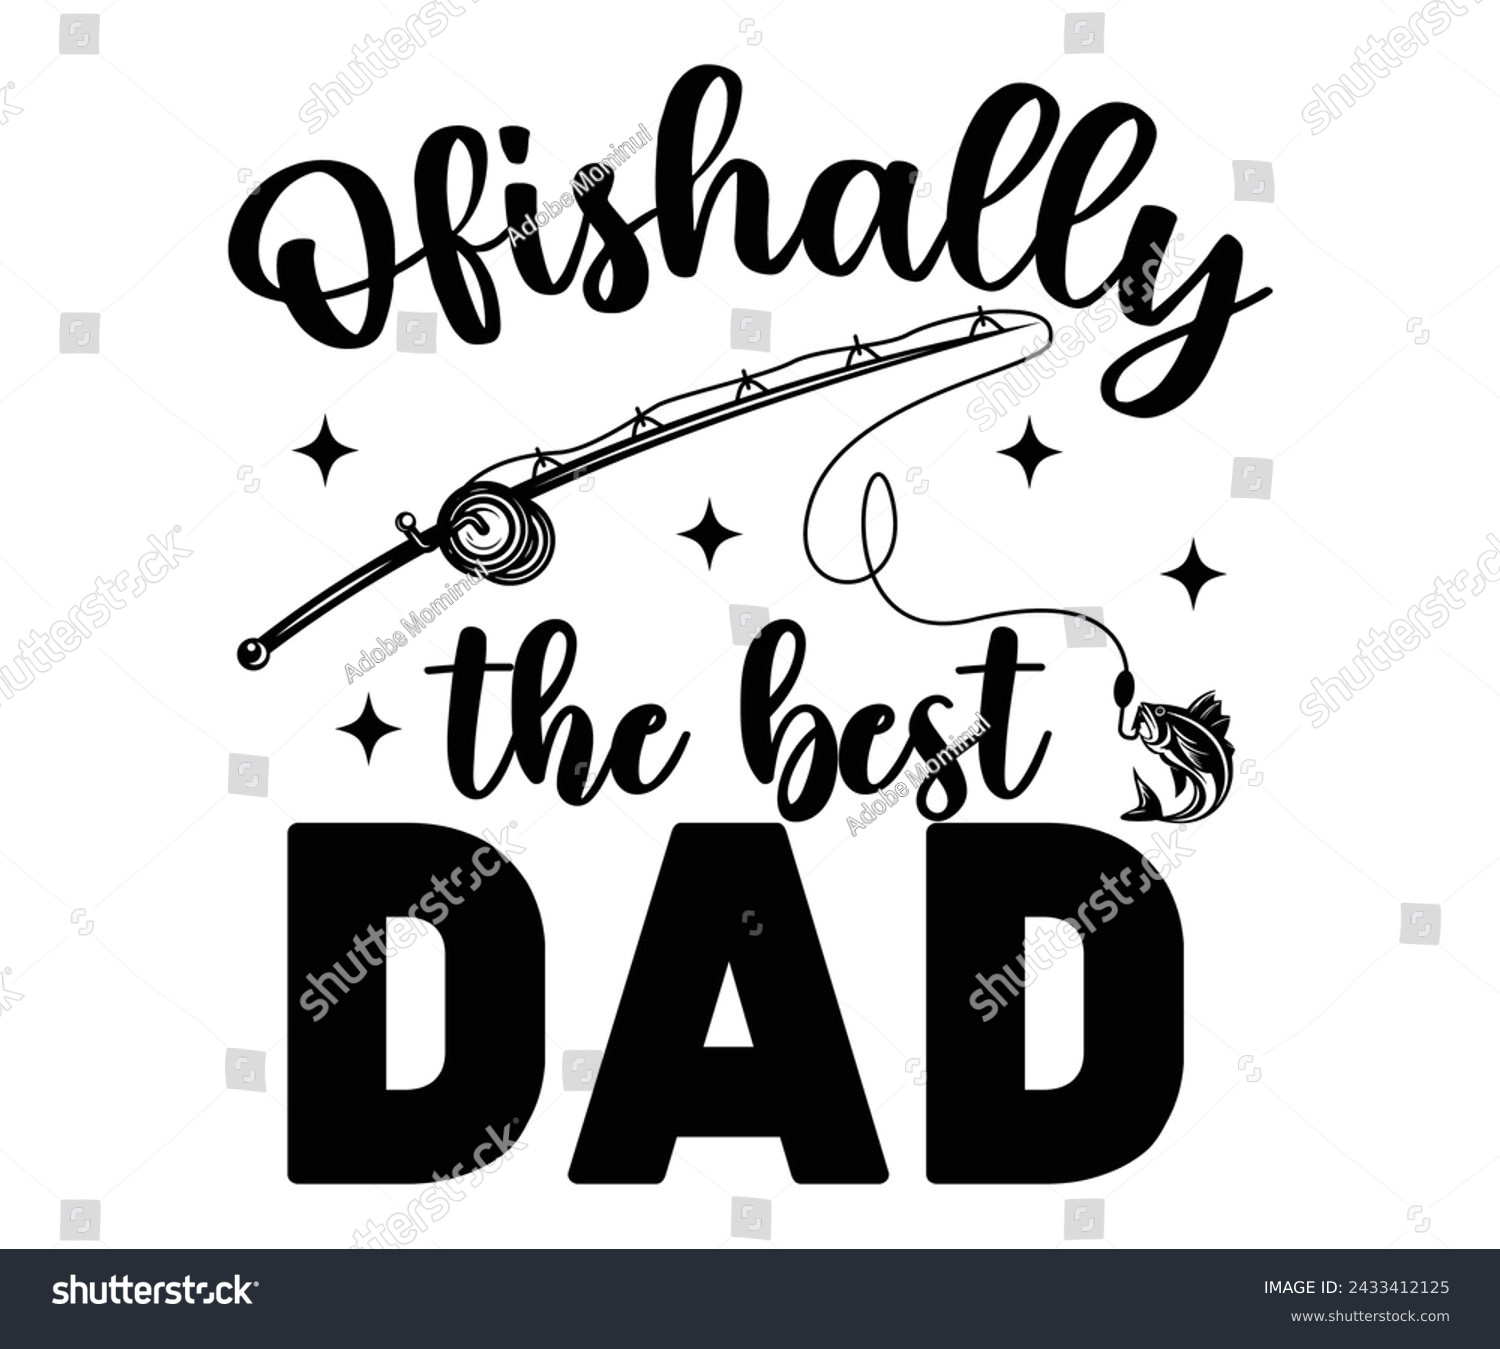 SVG of Ofishally The Best Dad Svg,Fishing Svg,Fishing Quote Svg,Fisherman Svg,Fishing Rod,Dad Svg,Fishing Dad,Father's Day,Lucky Fishing Shirt,Cut File,Commercial Use svg